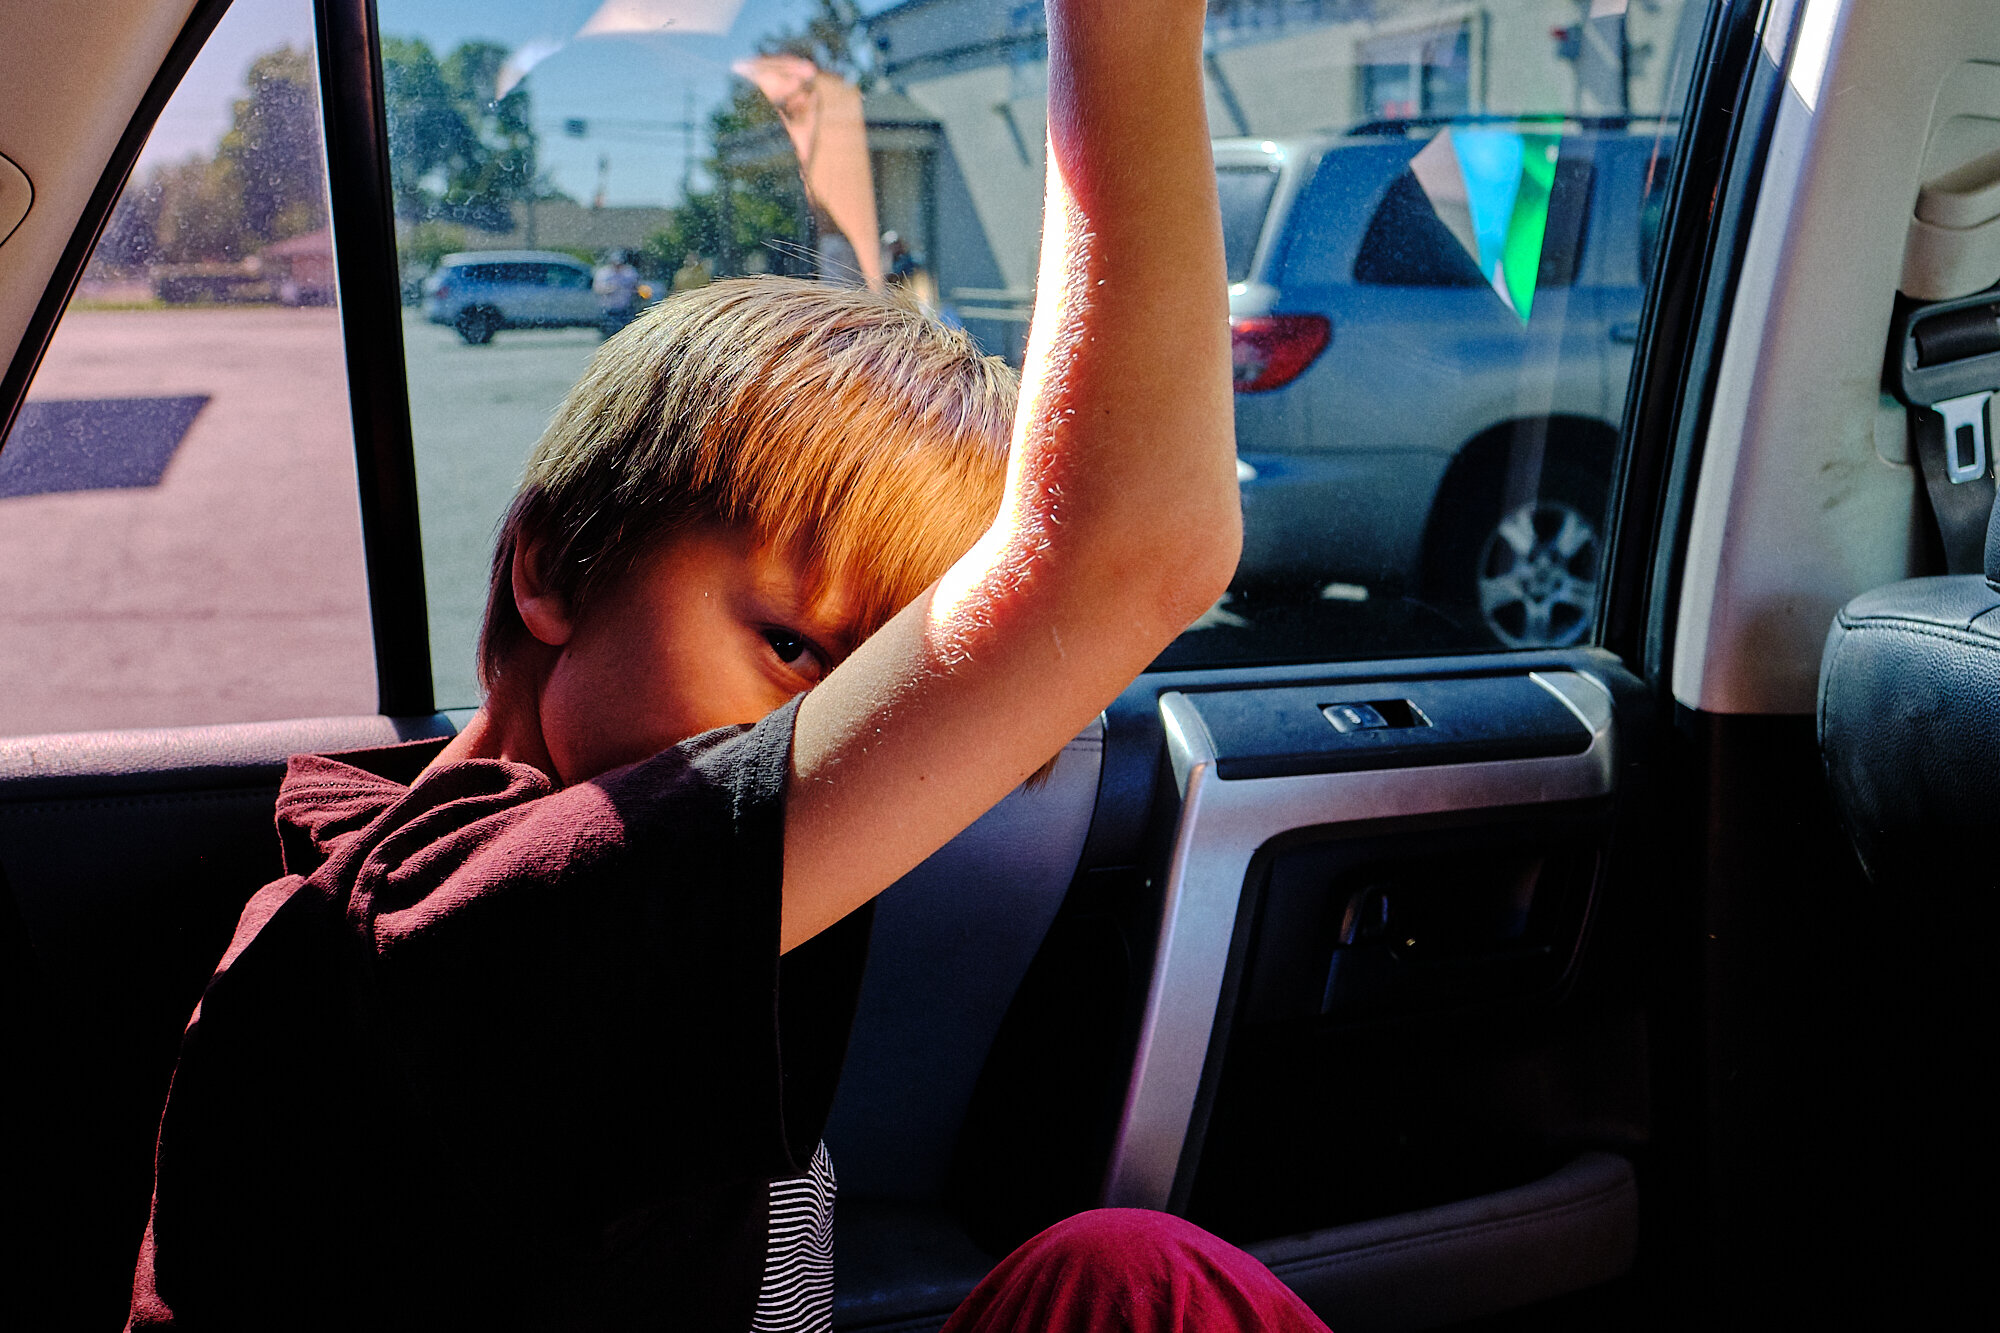  Cole gets moody while waiting in the car on a grocery run. | 10/11/20 Oroville, CA 